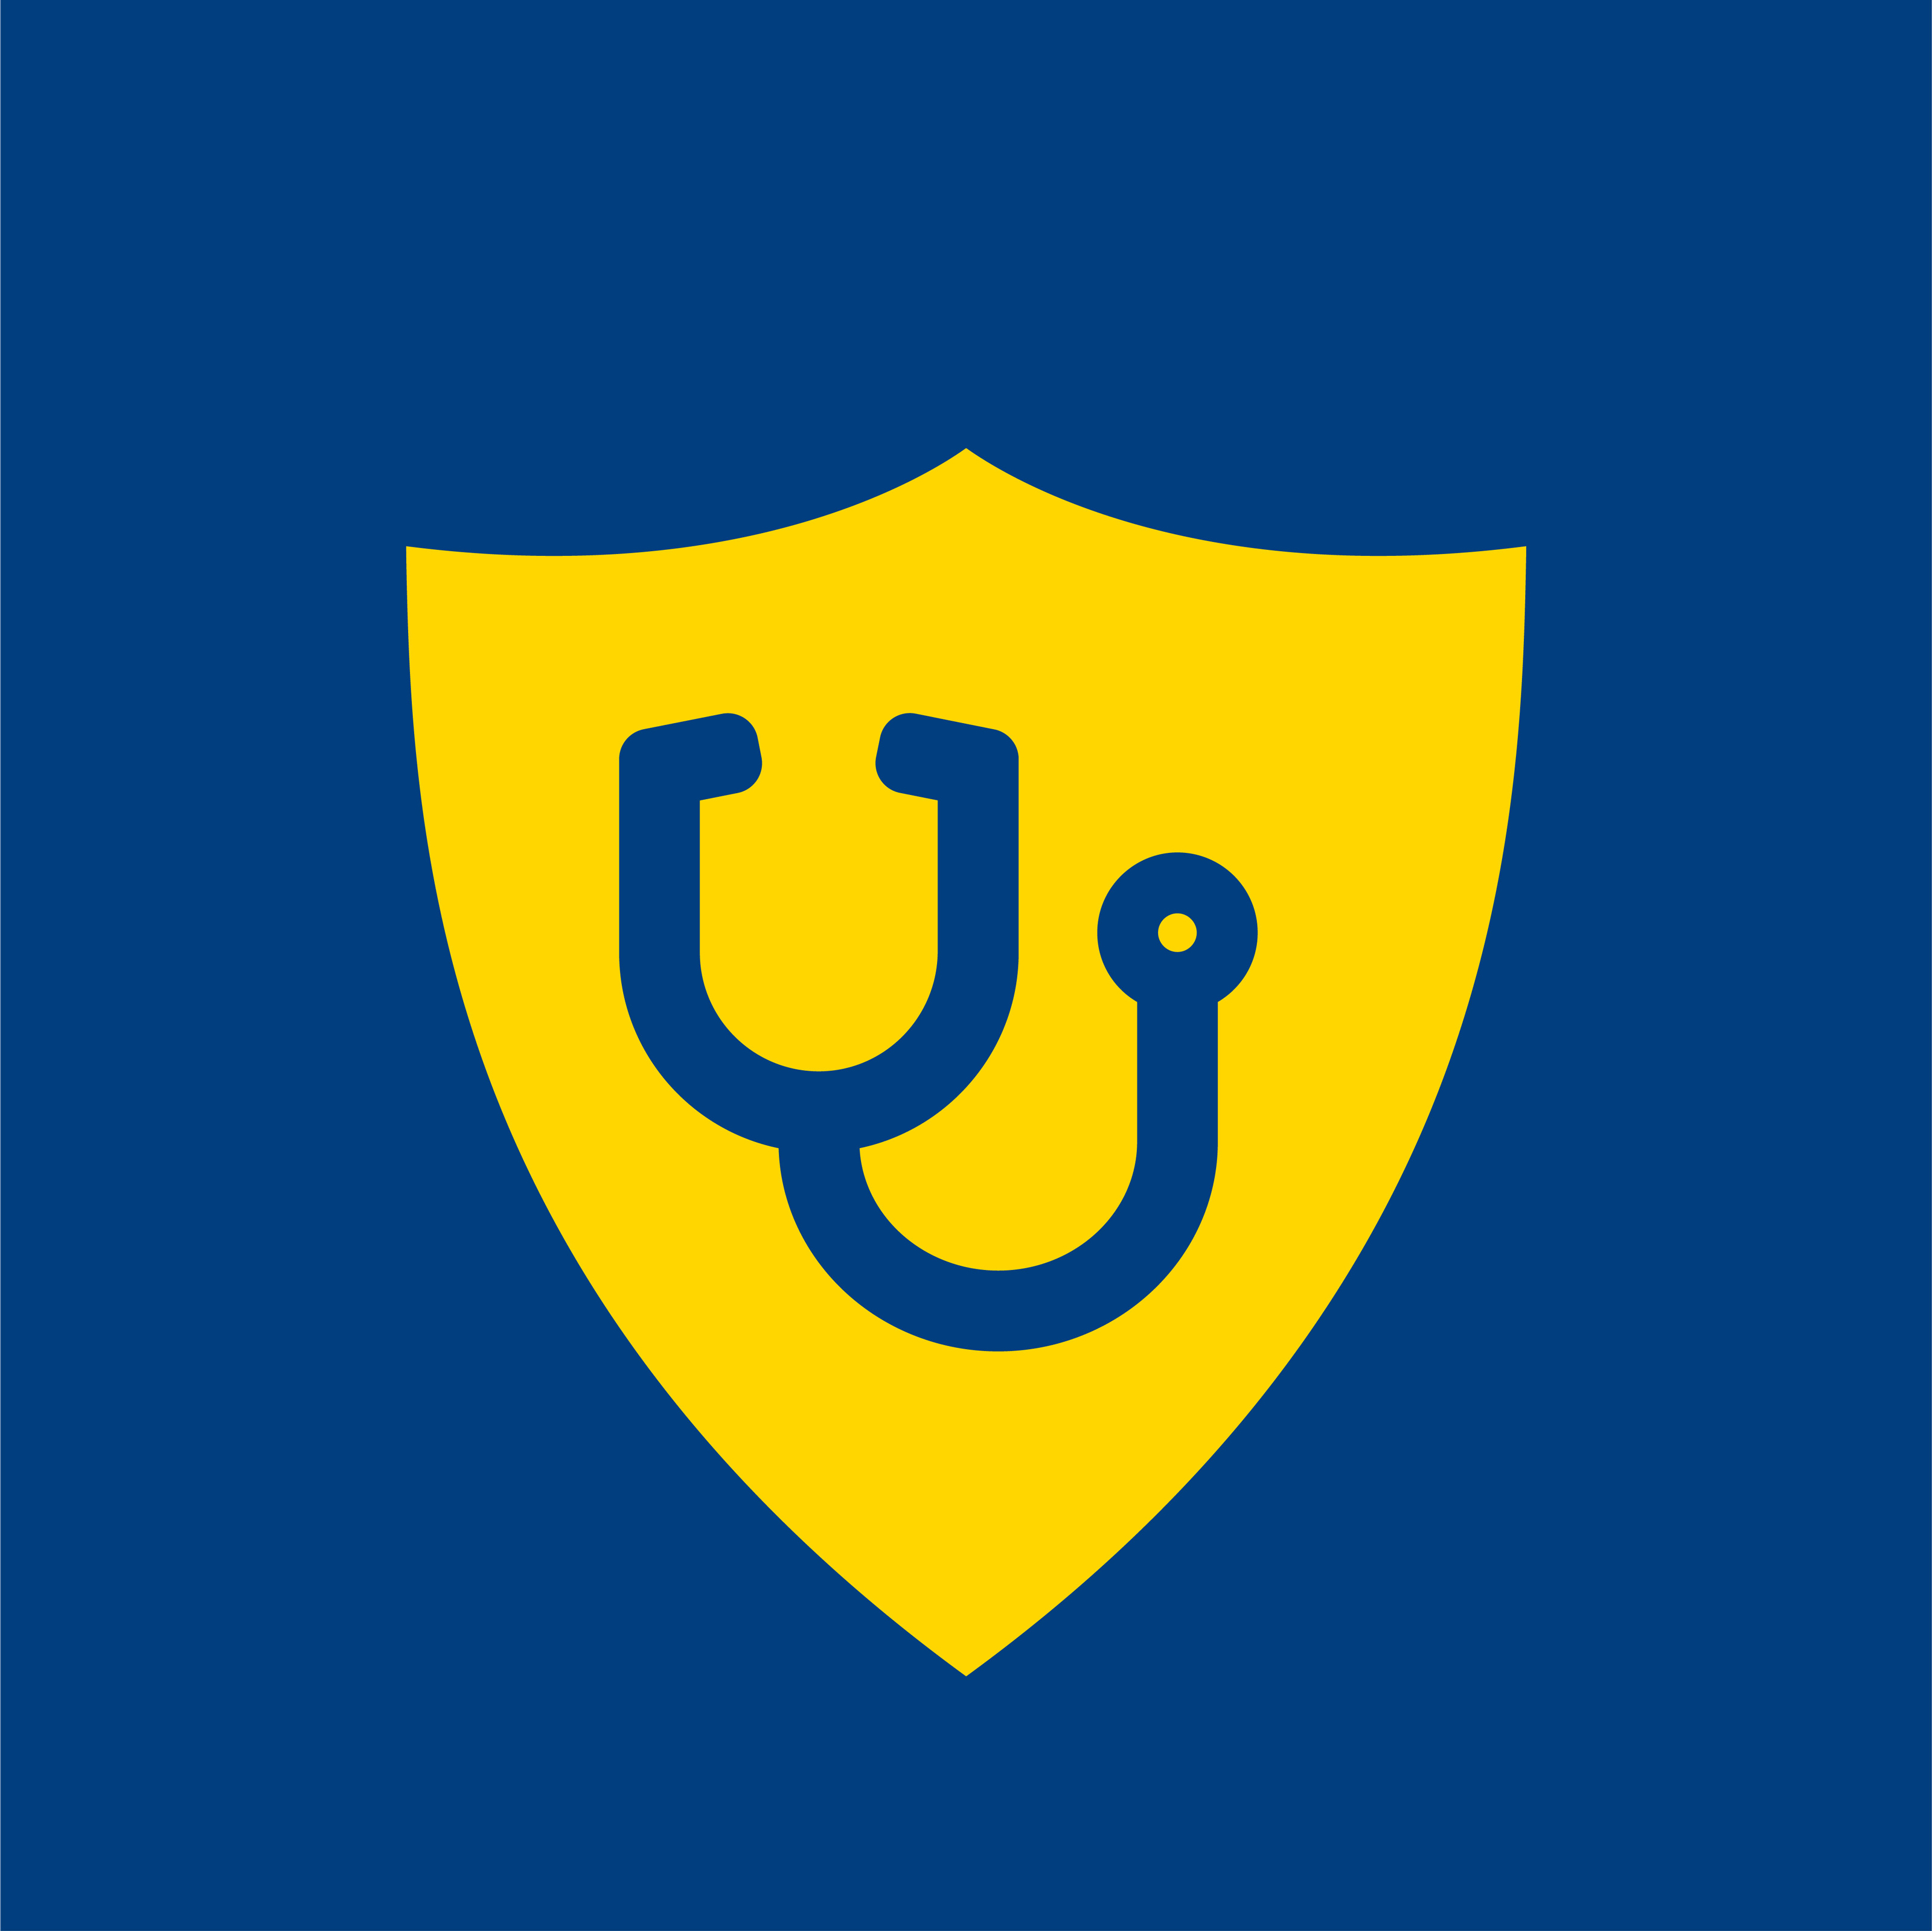 Facebook profile image - shield icon with stethoscope